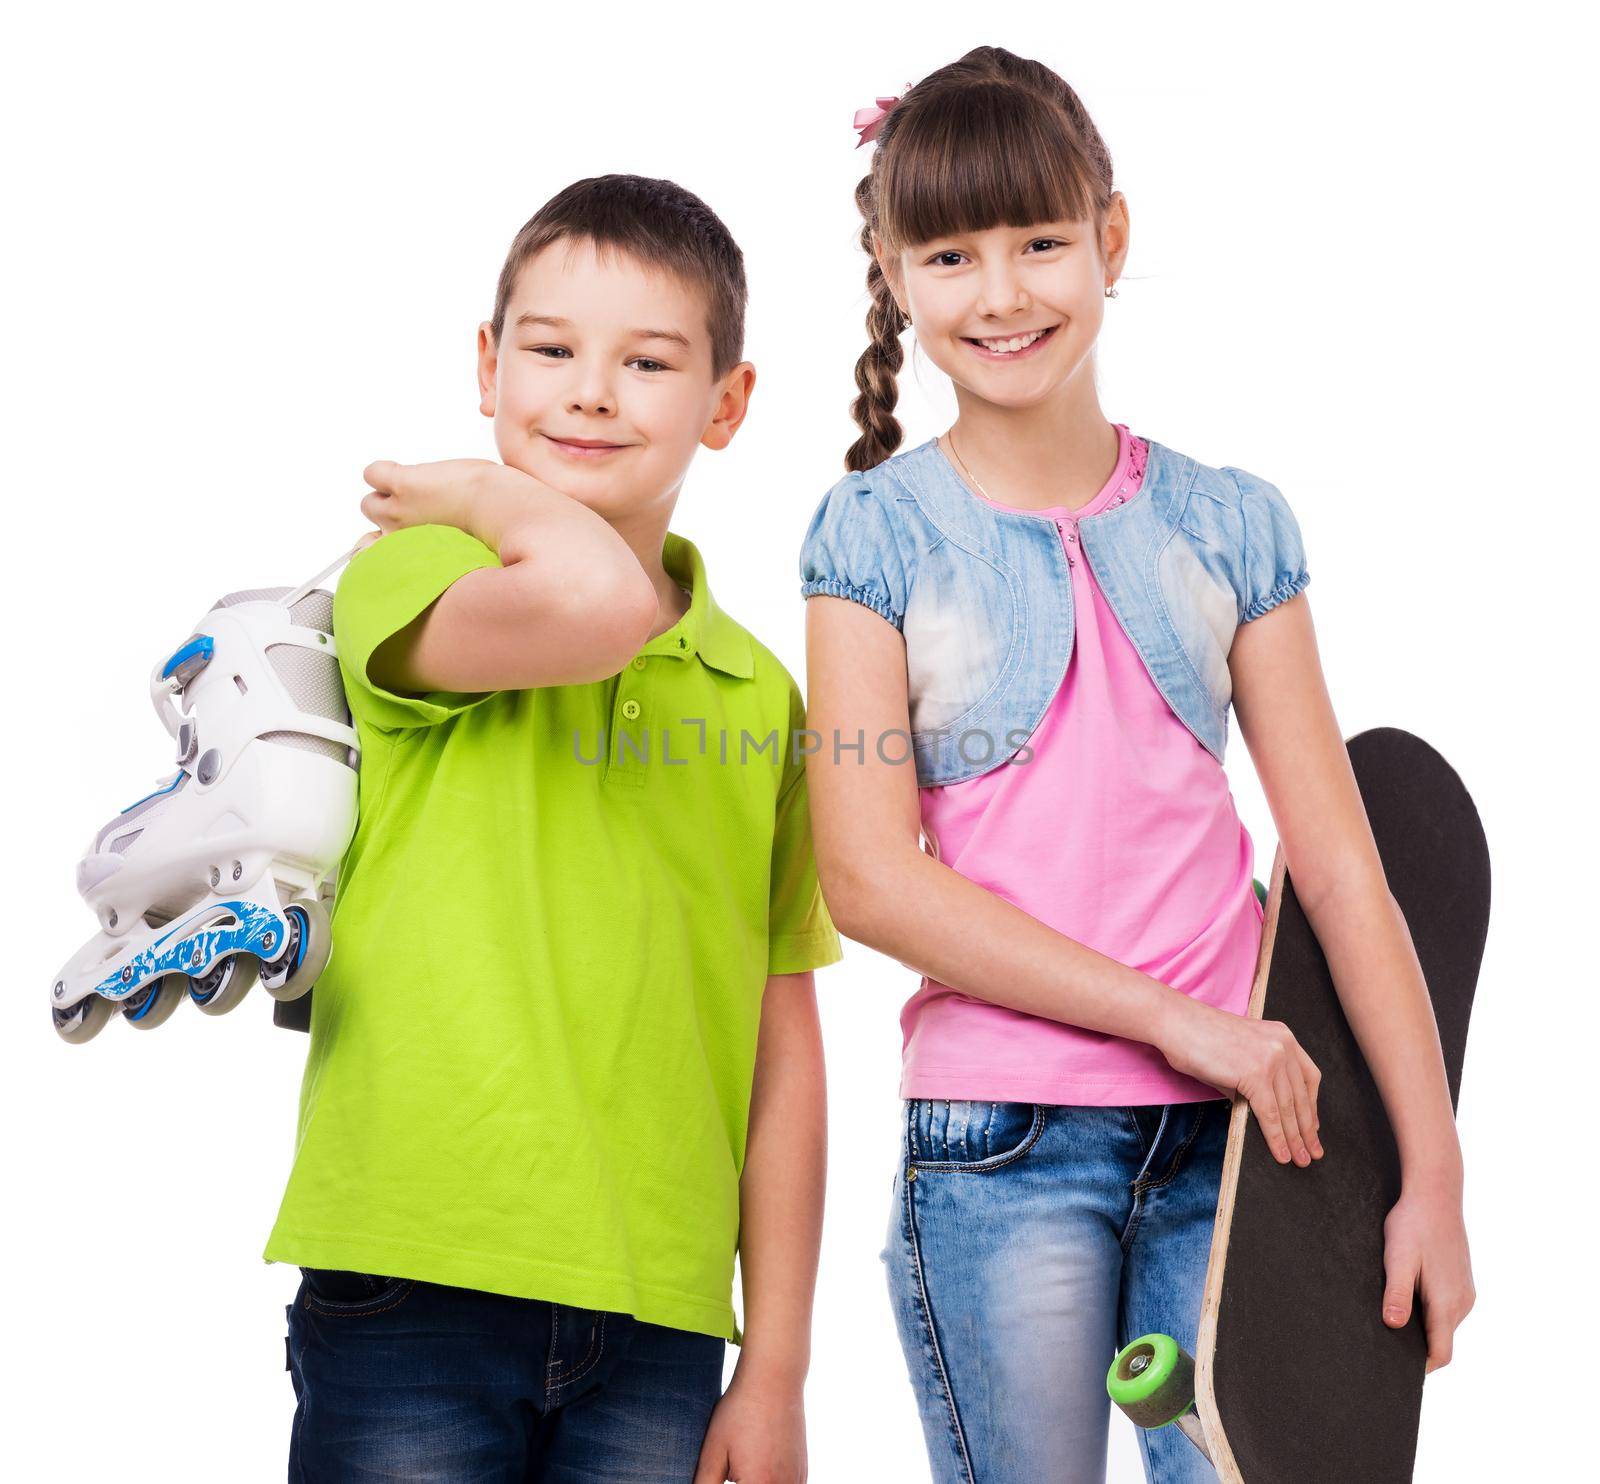 smiling boy and girl with skate and rollers isolated on white background